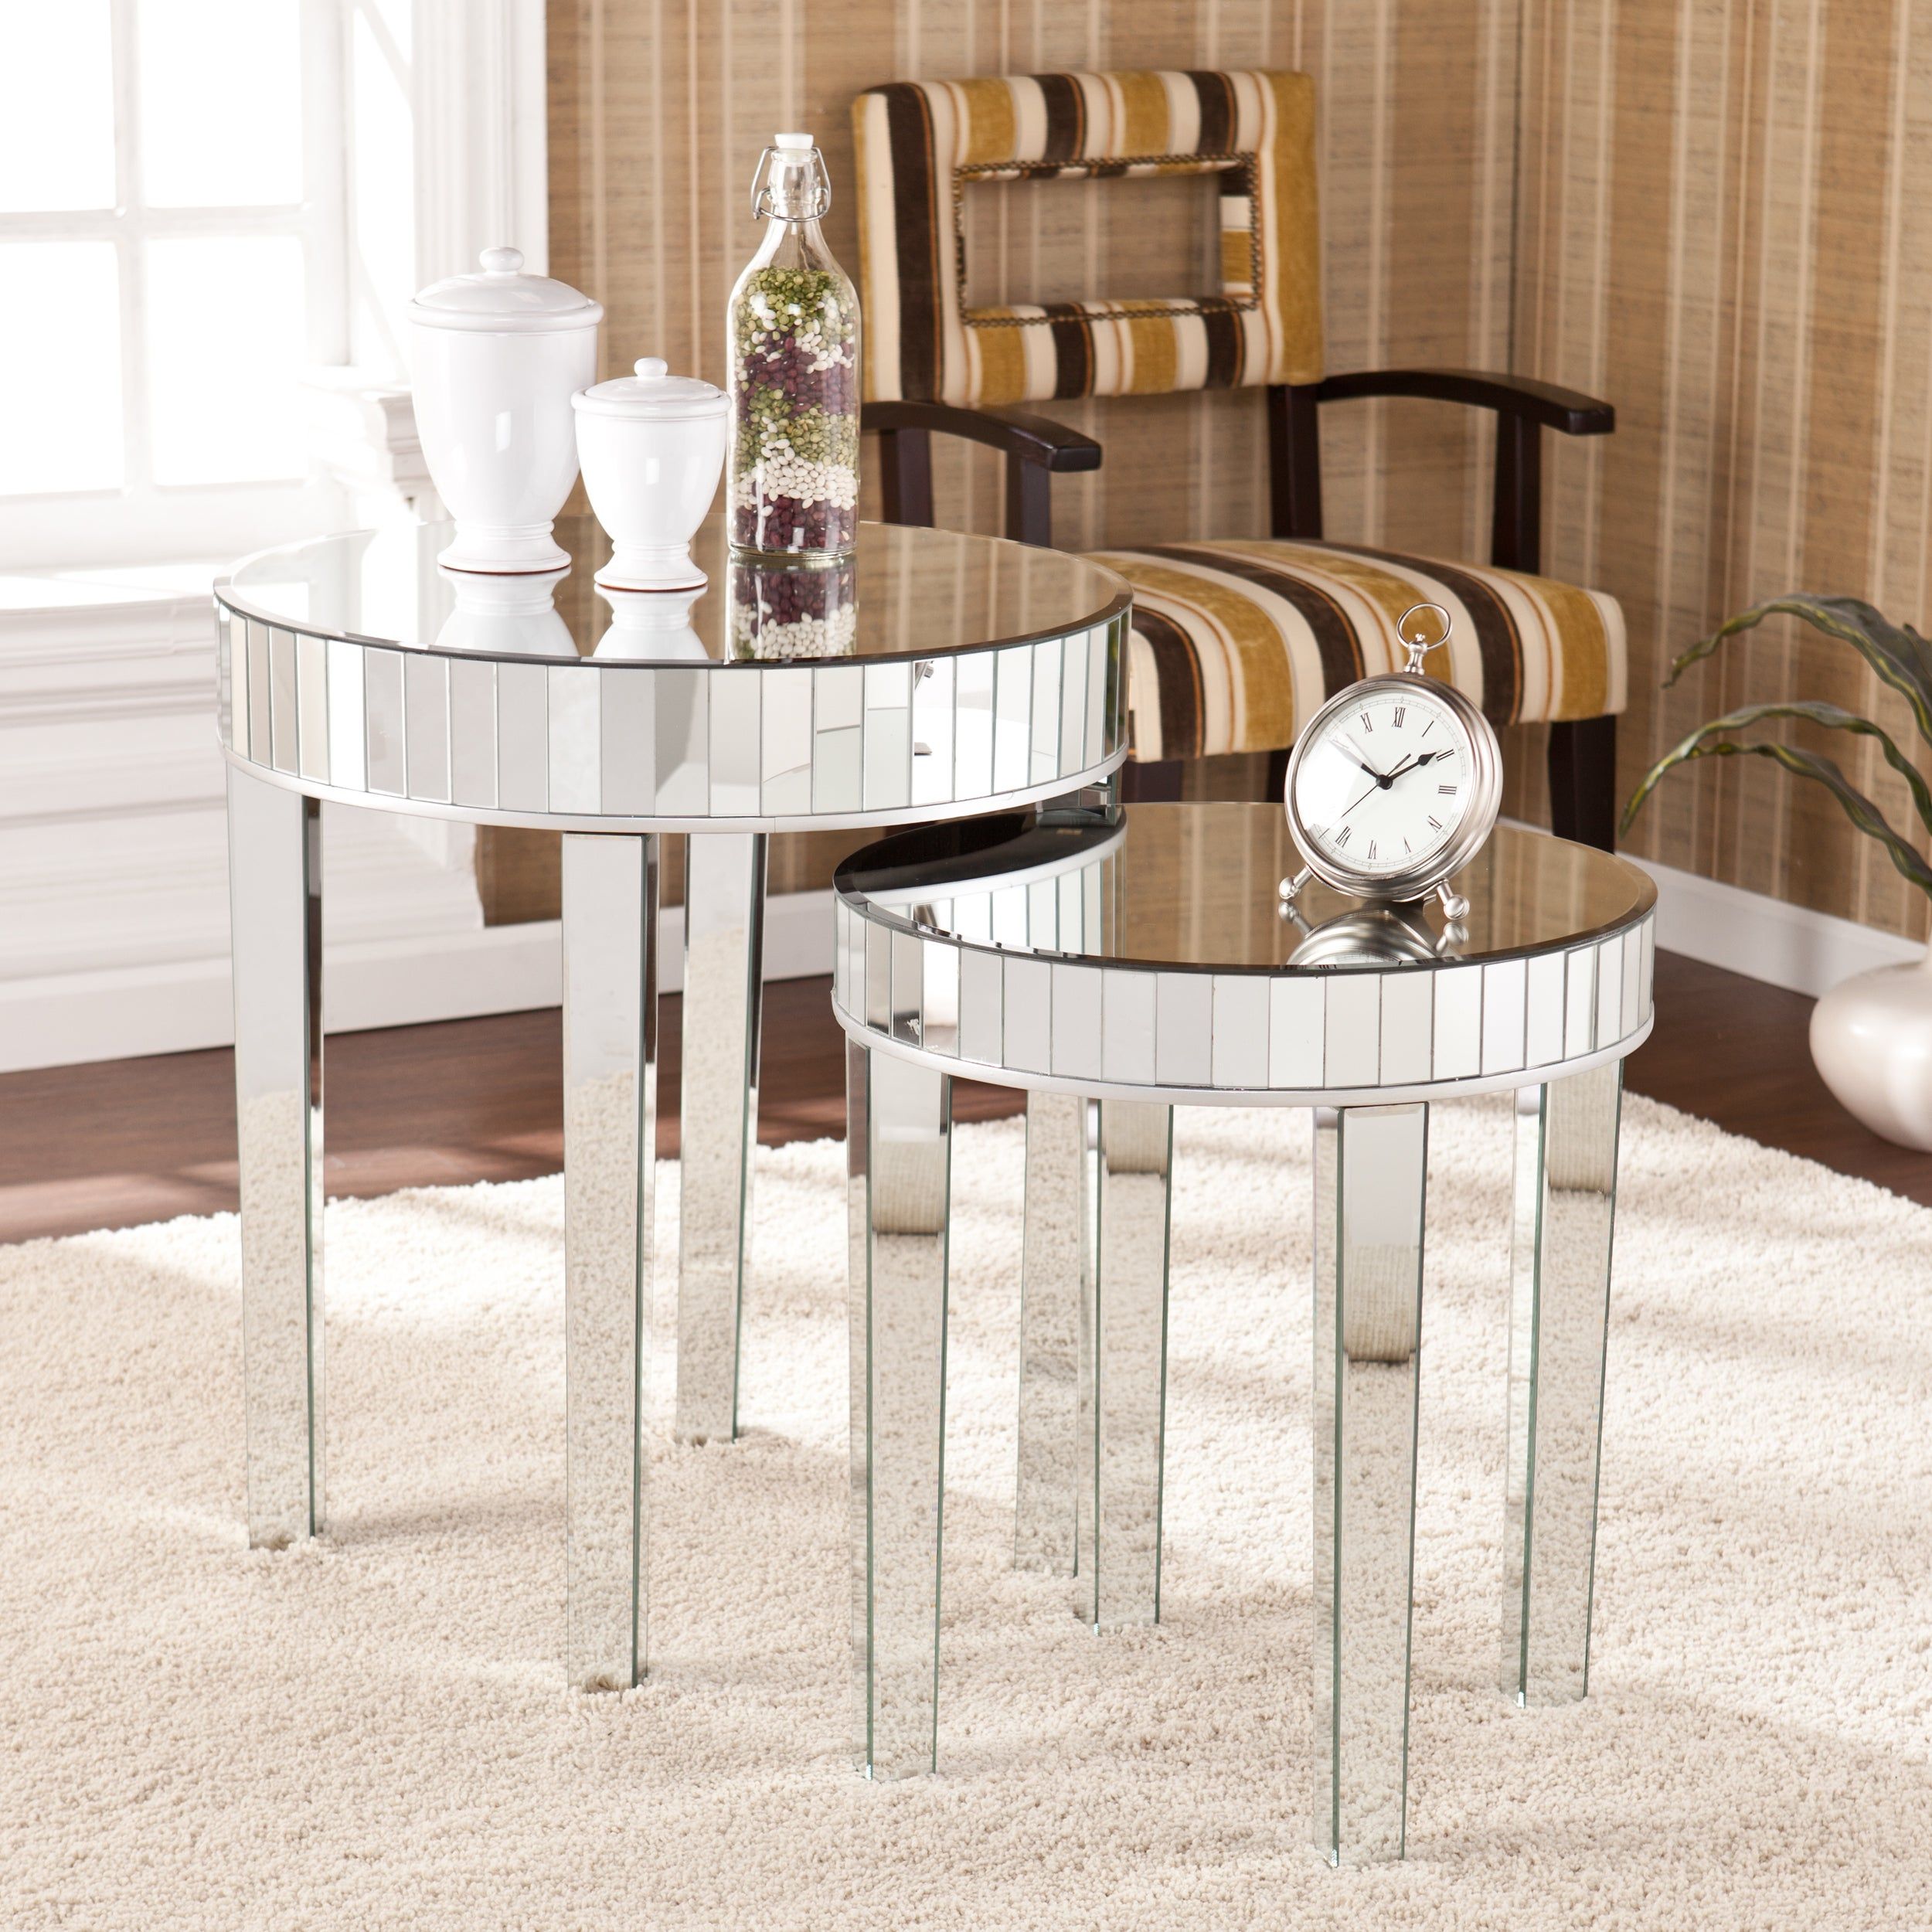 Shop Harper Blvd Tifton Round Mirrored Nesting Accent Table With Regard To Tifton Traditional Beveled Accent Mirrors (View 14 of 20)